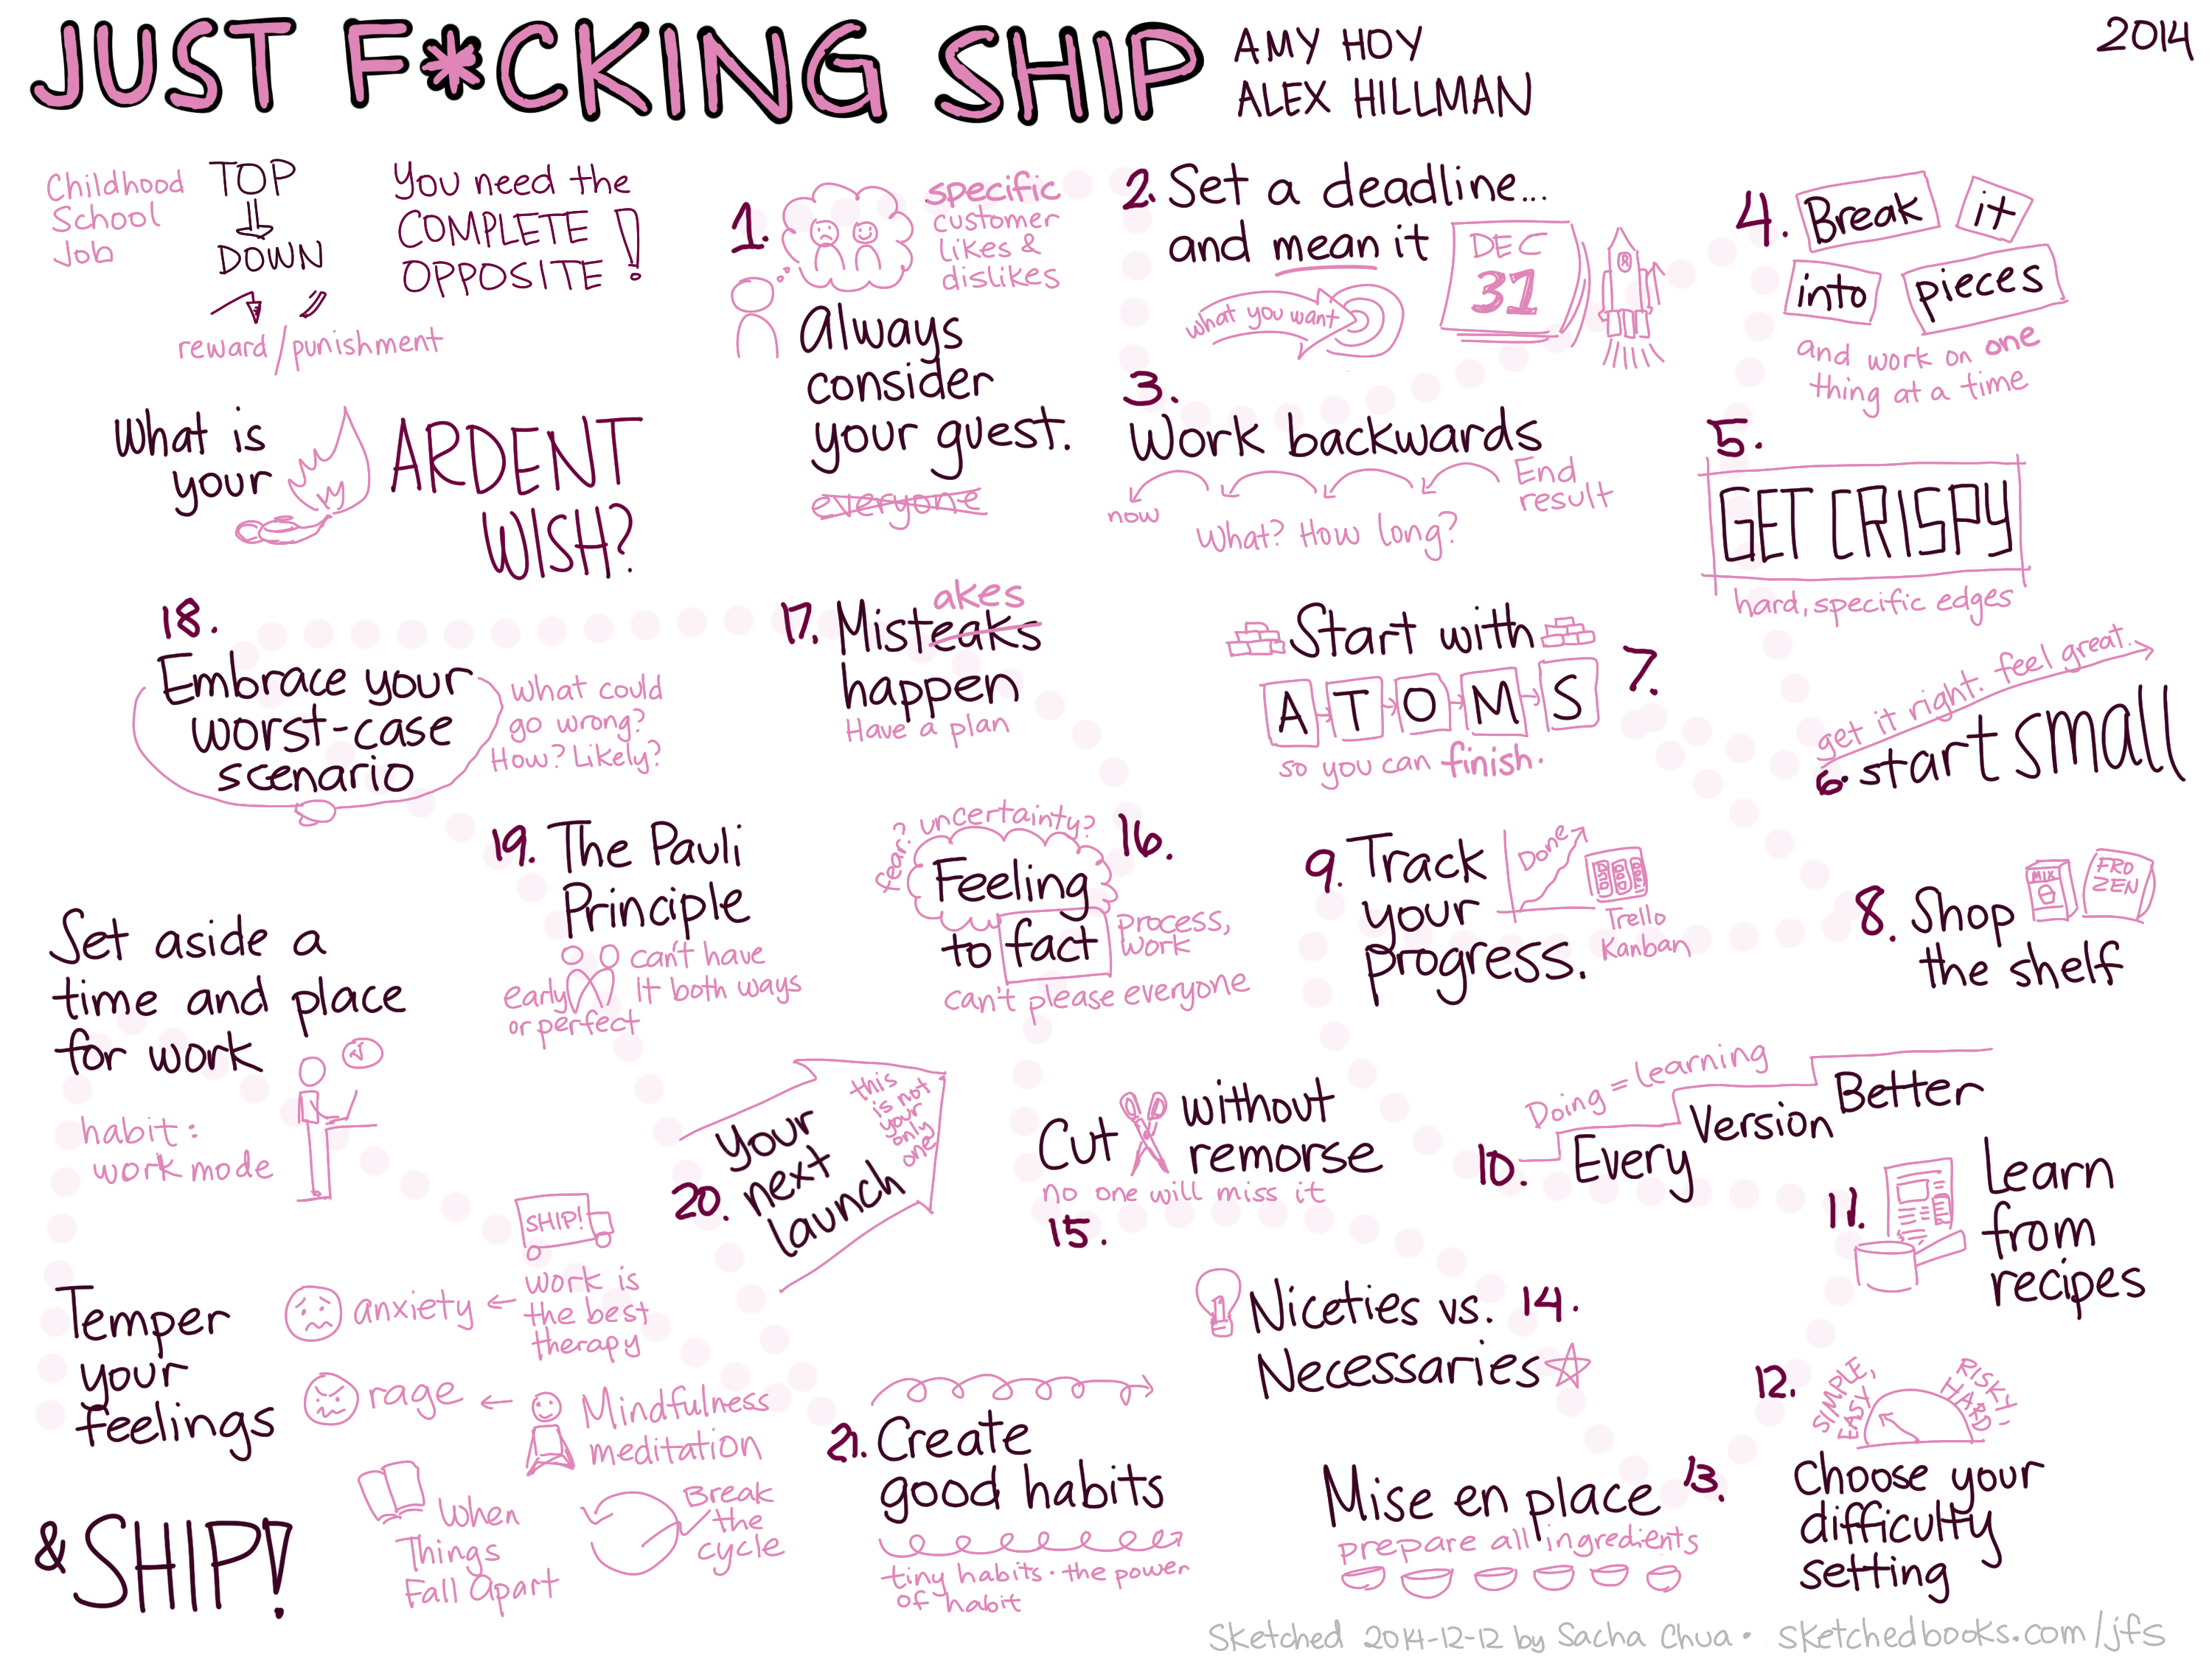 Text and sketchy illustrations summarizing the 20 steps in the book Just Fucking Ship